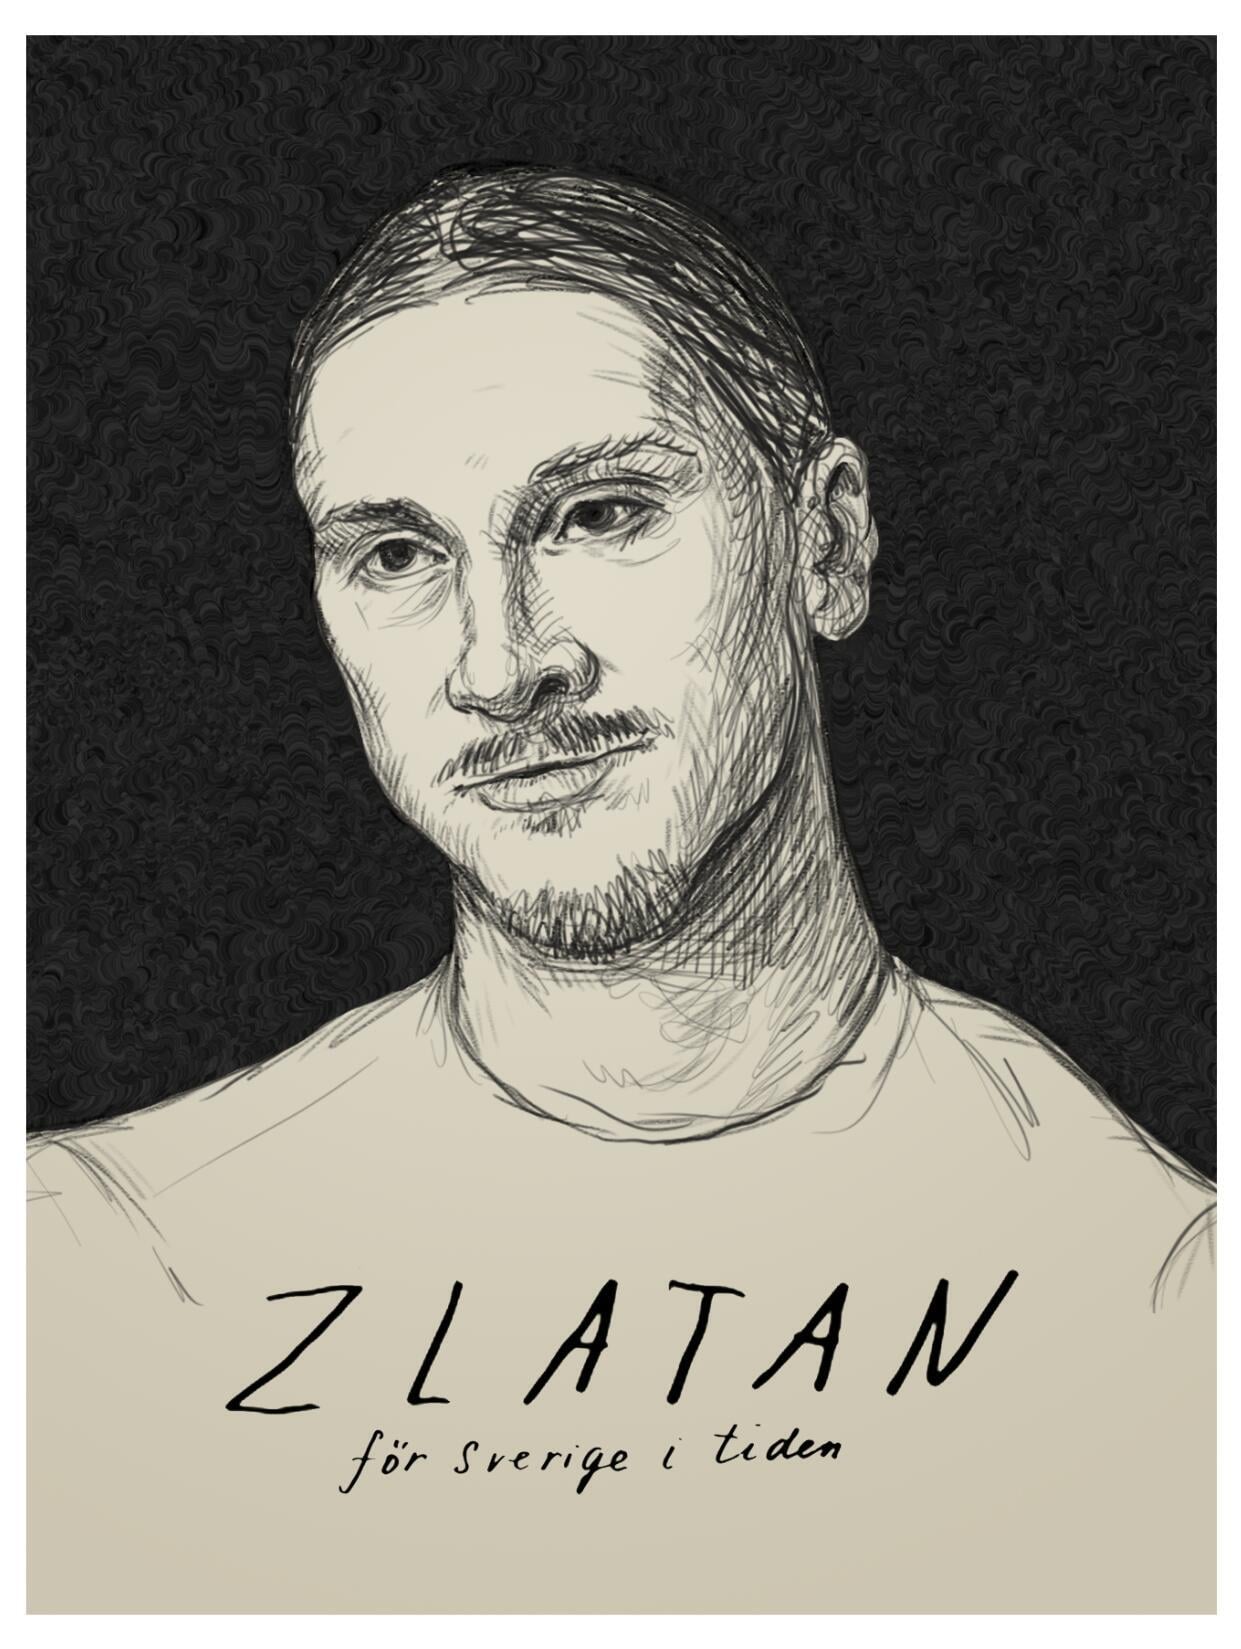 ZLATAN — For Sweden With The Times